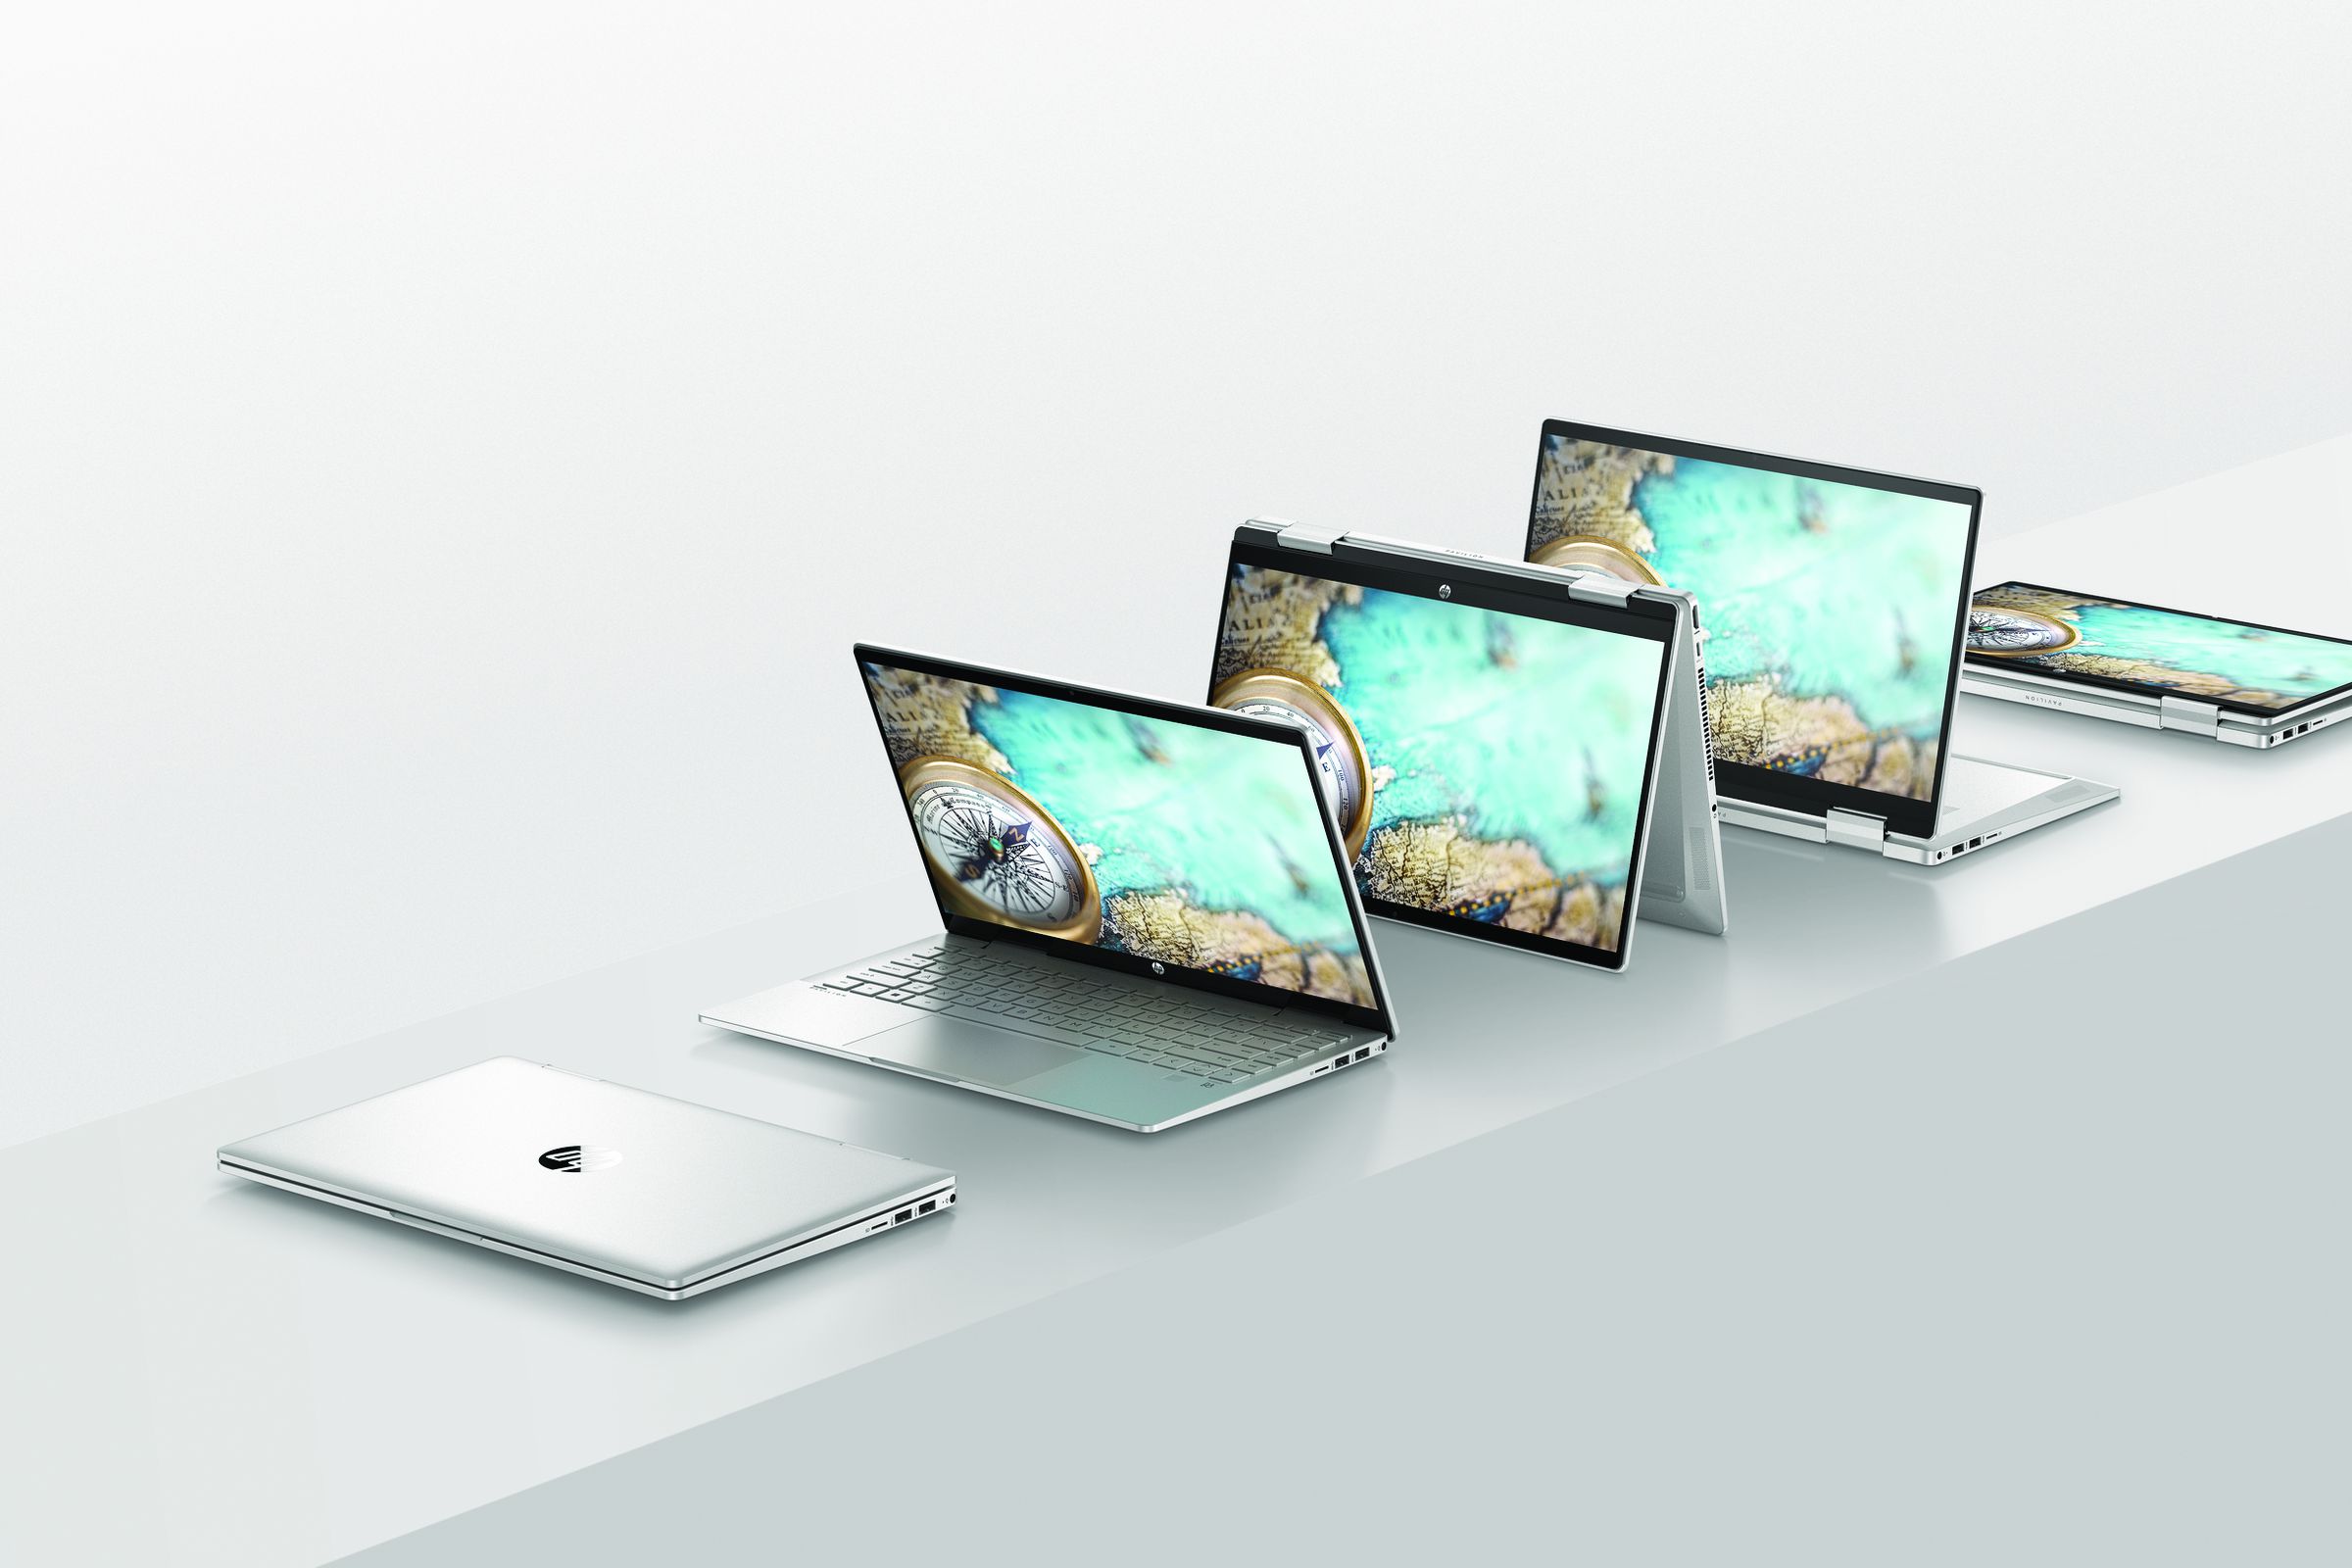 Five HP Pavilion x360 14 models lined up on a white counter in cloesd, clamshell, tent, backwards, and tablet modes respectively. The screen displays a bird’s-eye view of cliffs and water.